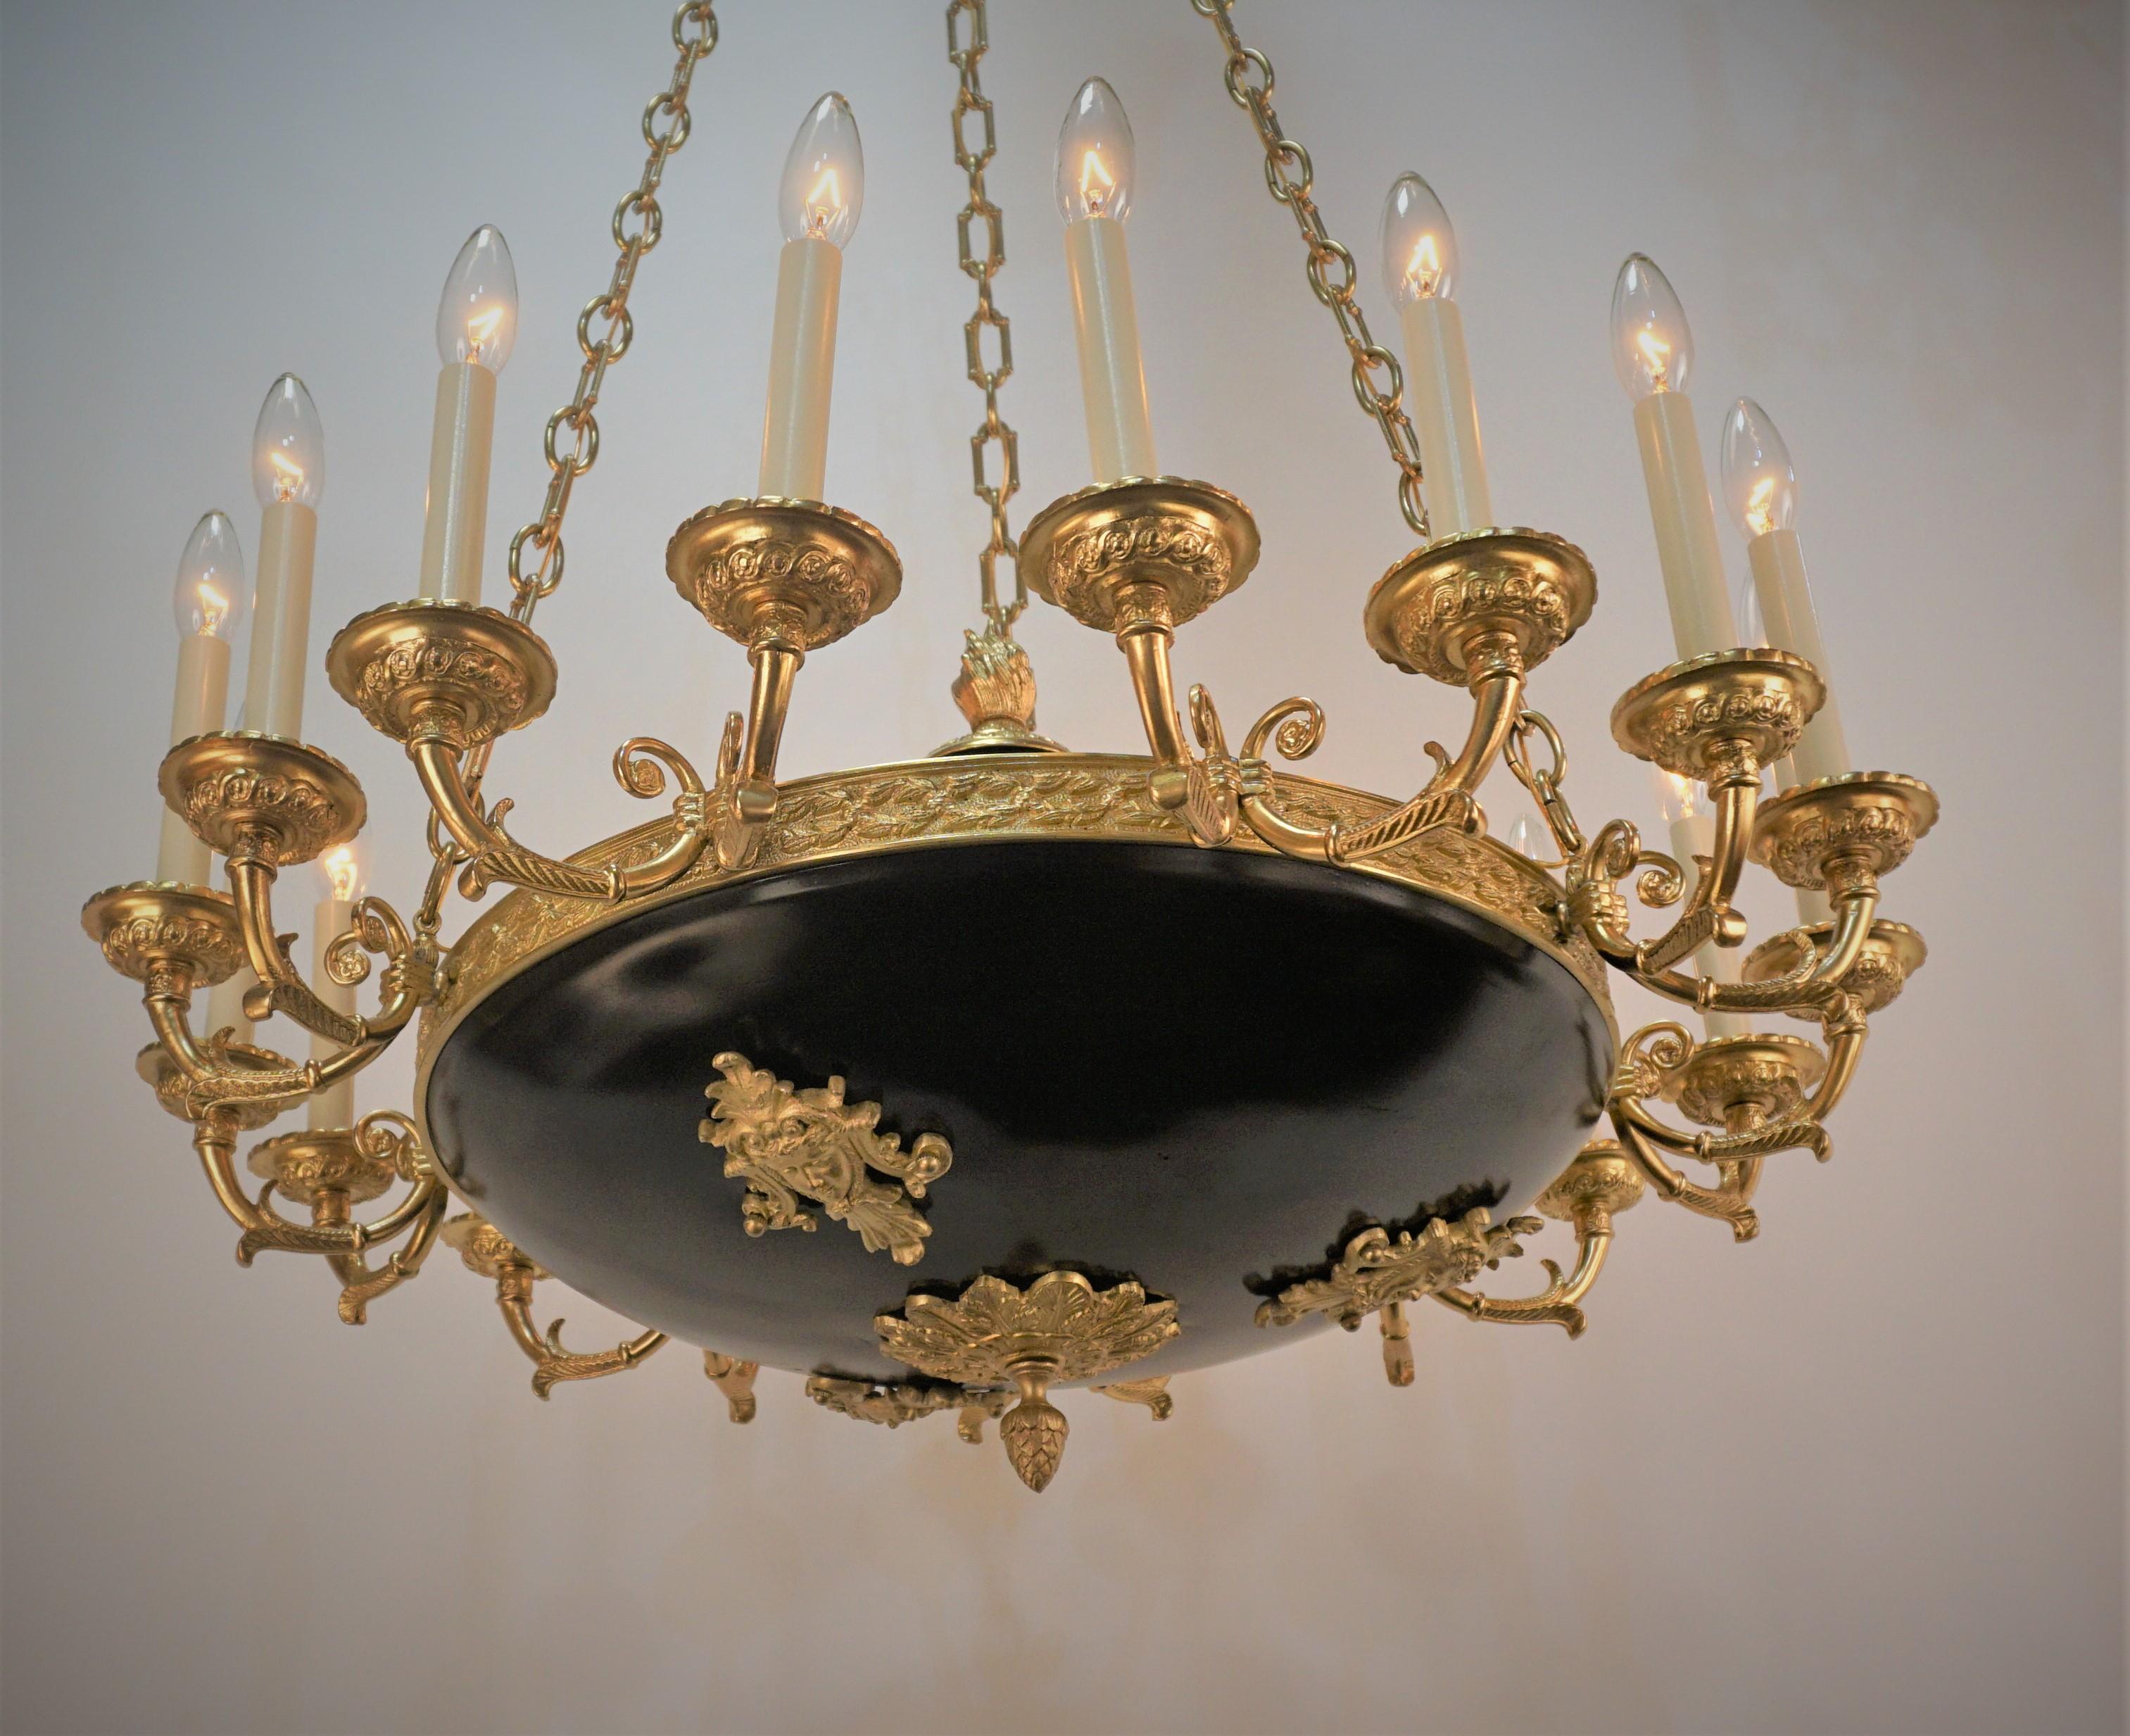 French large bronze eighteen light chandelier with black lacquered center part. 
Professionally rewired and ready for installation.
Height can be adjusted by removing some of the chain.